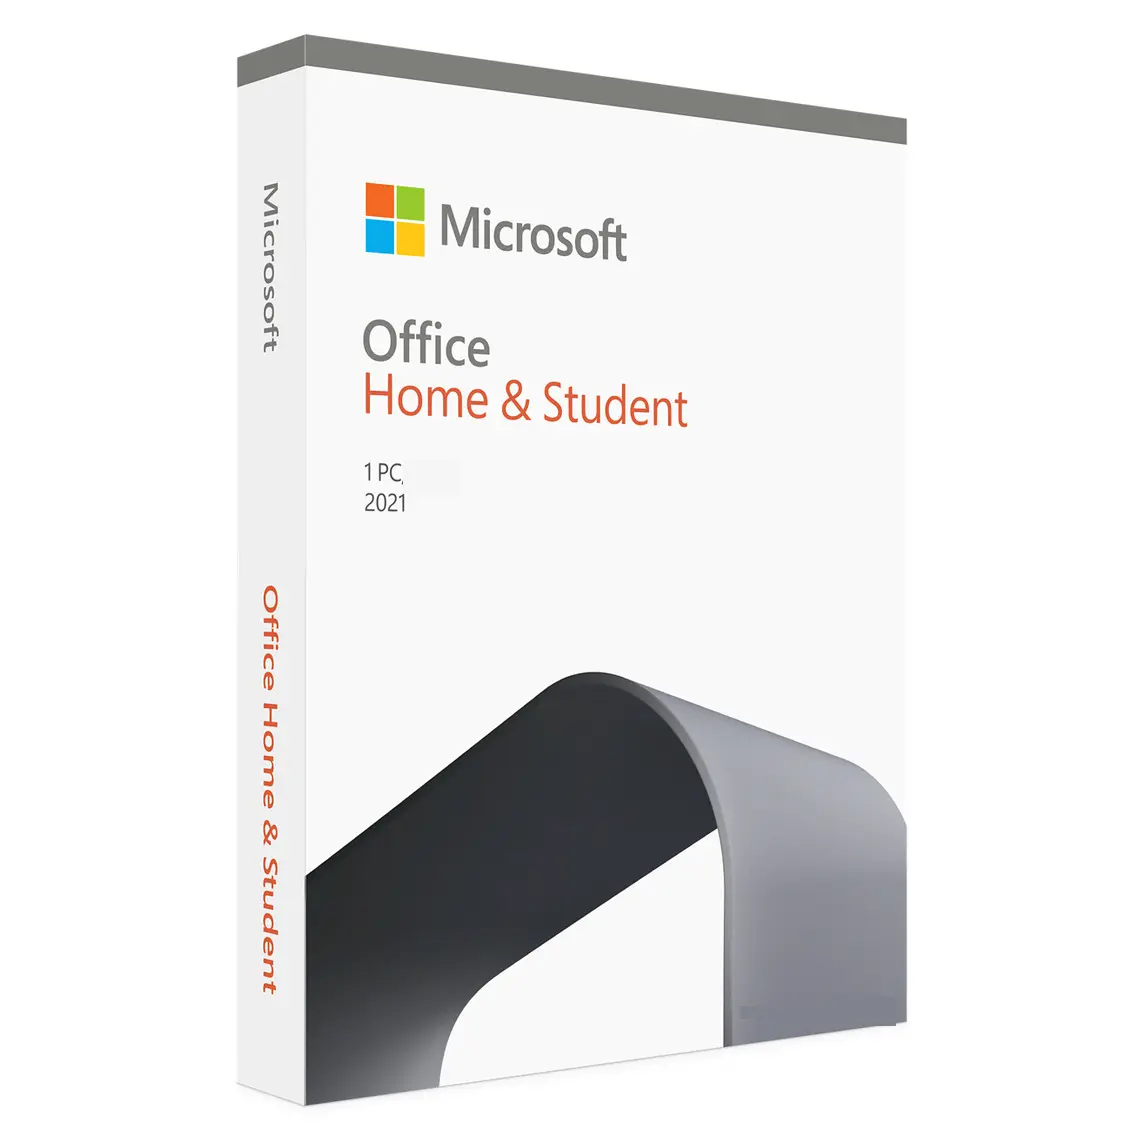 Microsoft Office 2021 Home and Student 100% online activation office 2021 HS send by Email office 2021 hs digital license